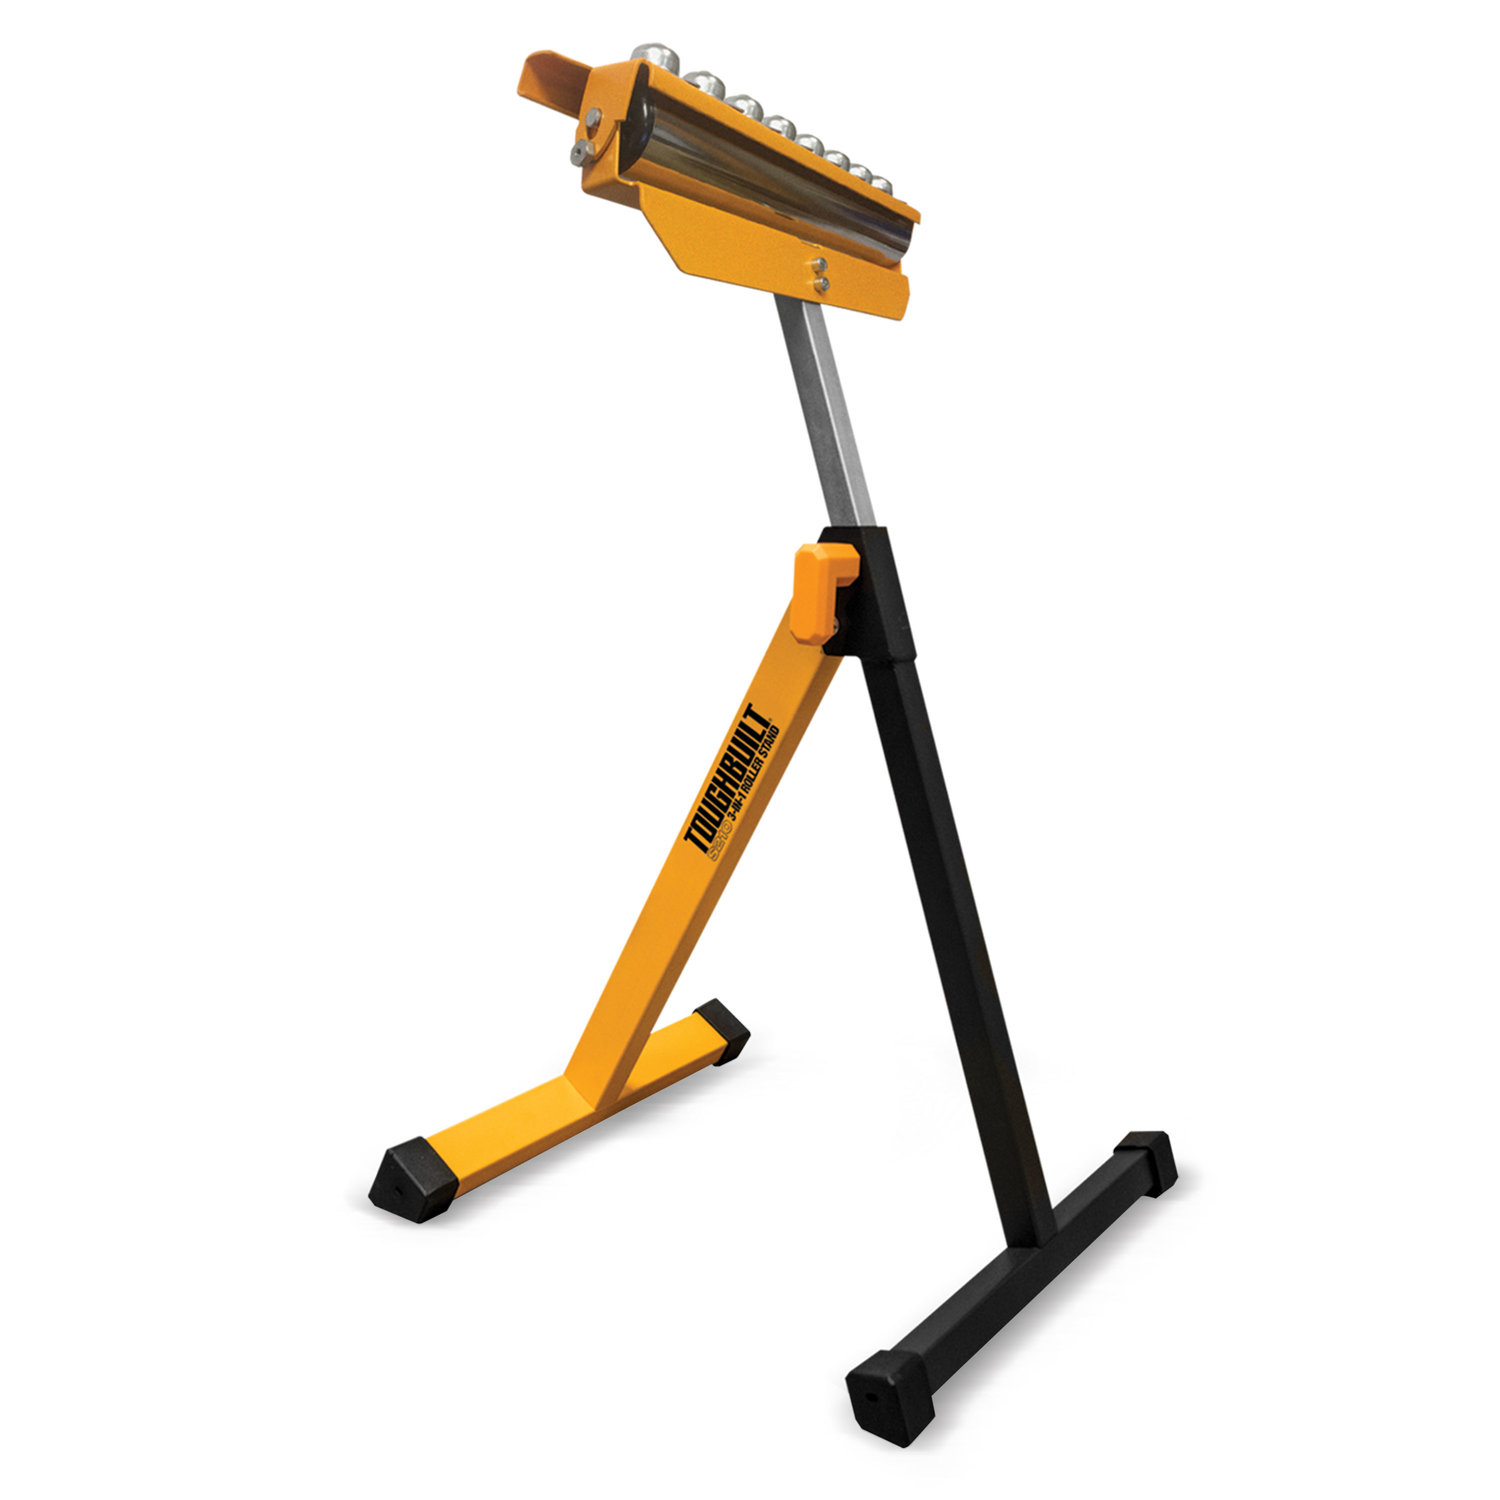 TB-S210 3-IN-1 Roller Stand — TOUGHBUILT